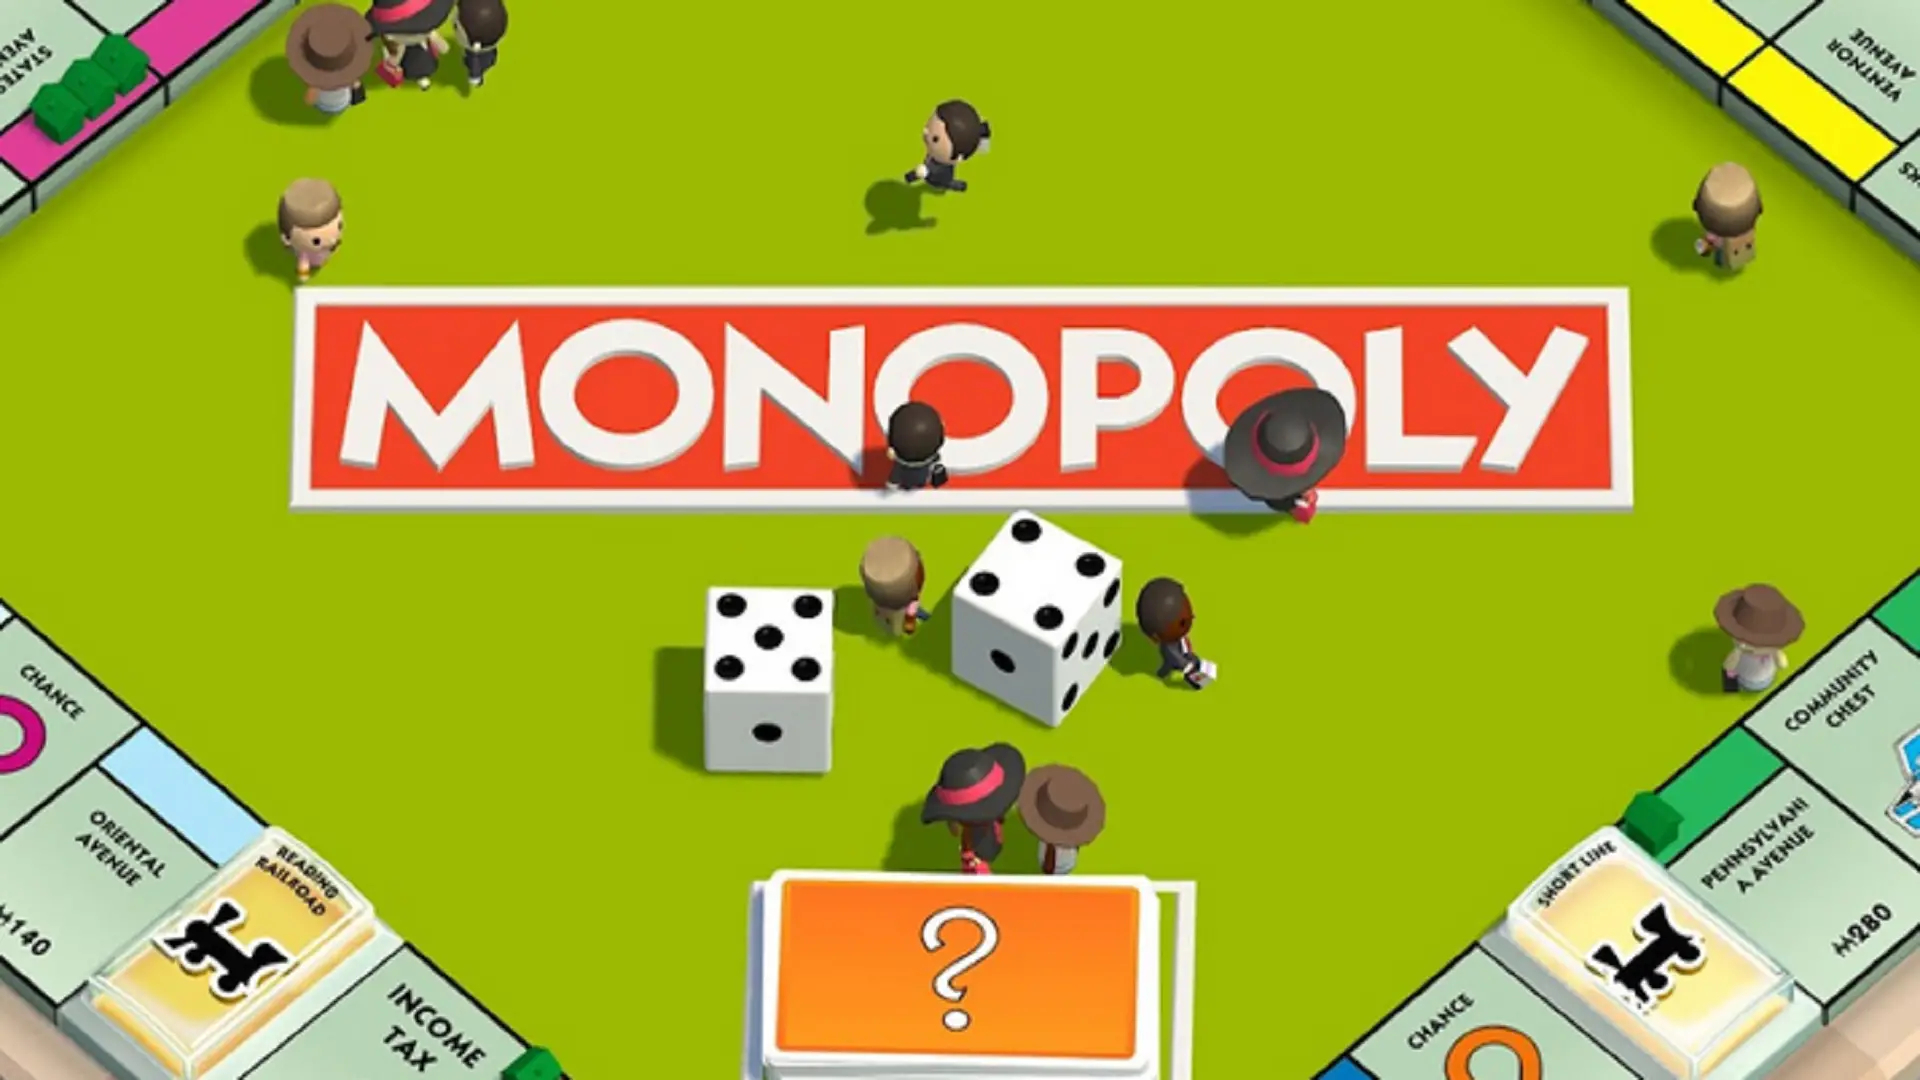 Read more about the article Monopoly Go Unlimited Money Dice MOD APK